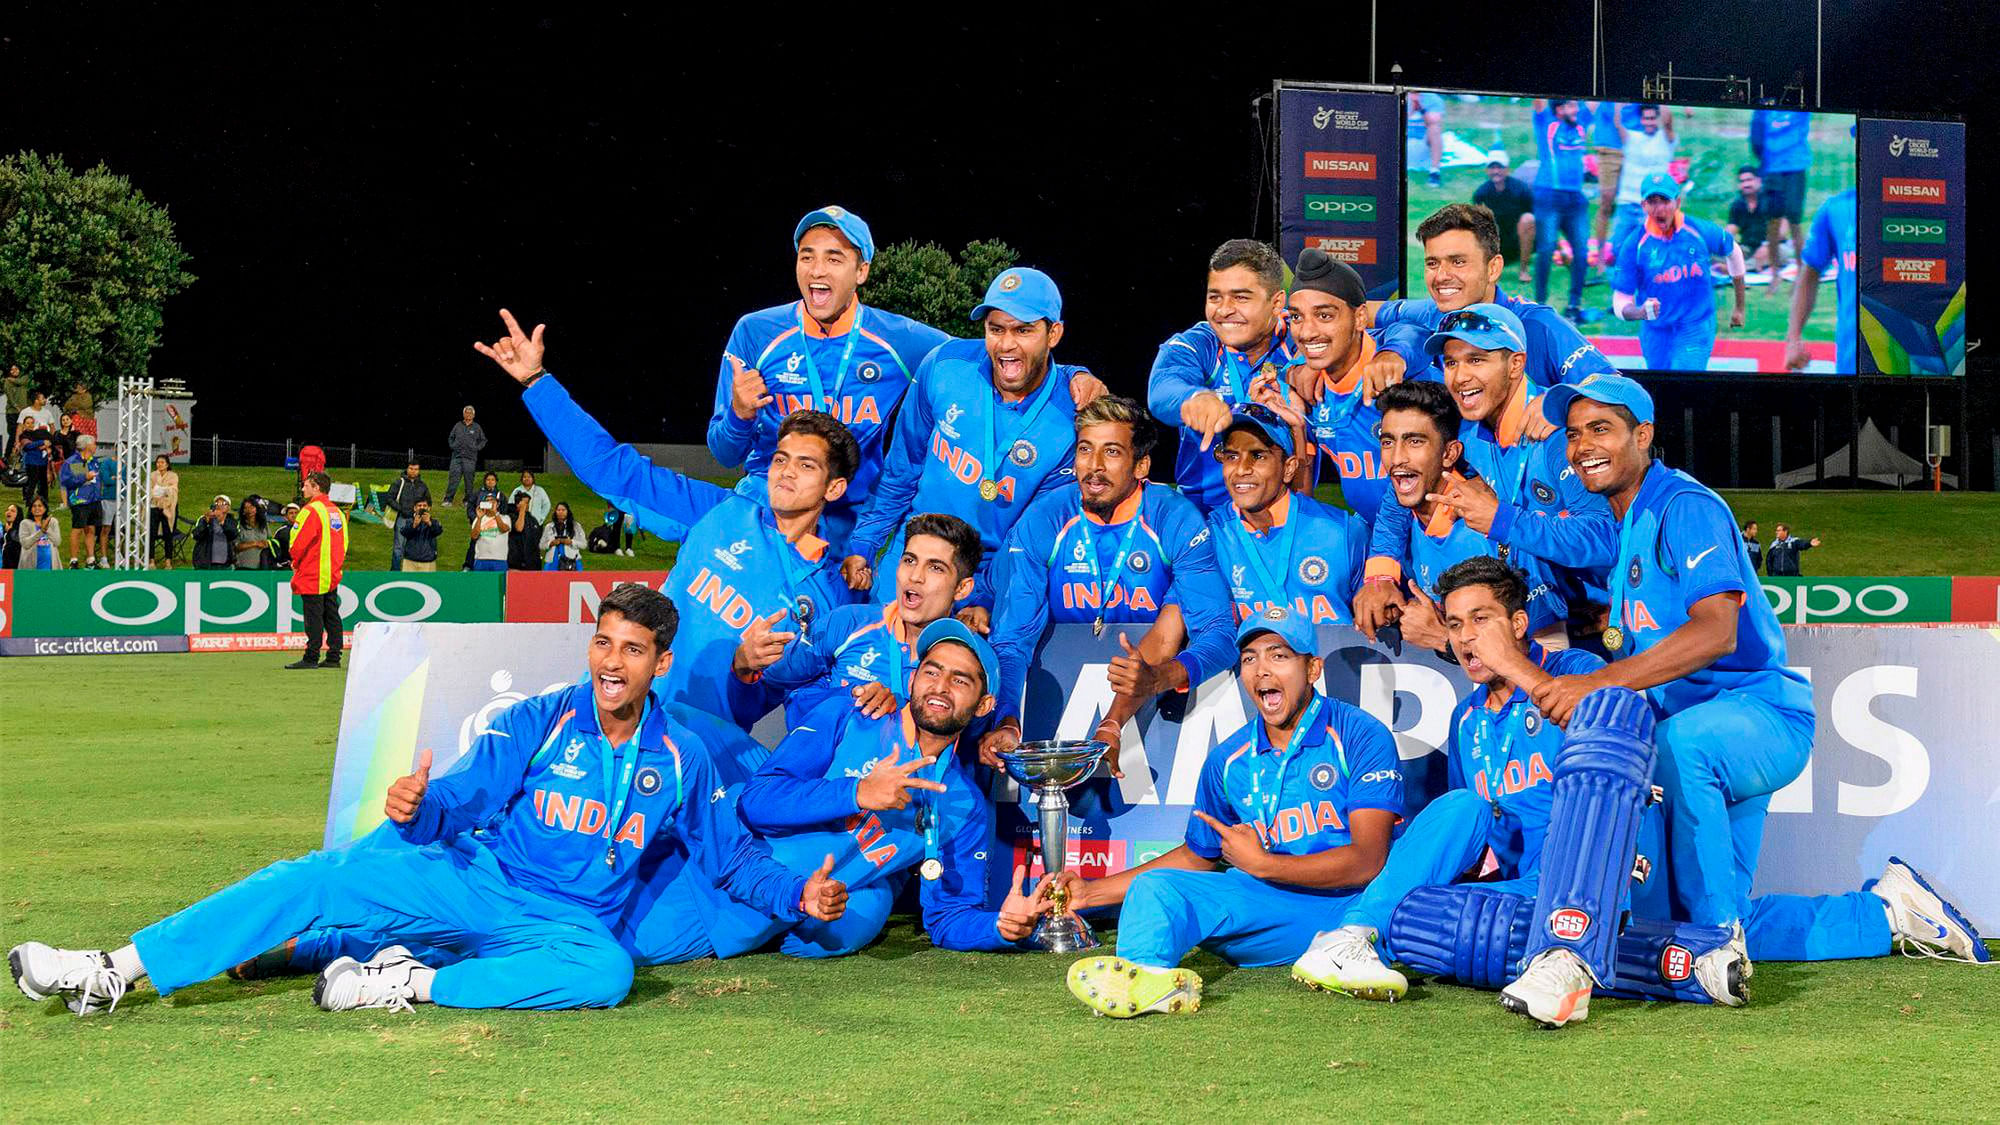 The India U-19 team pose for a picture after the World Cup final.